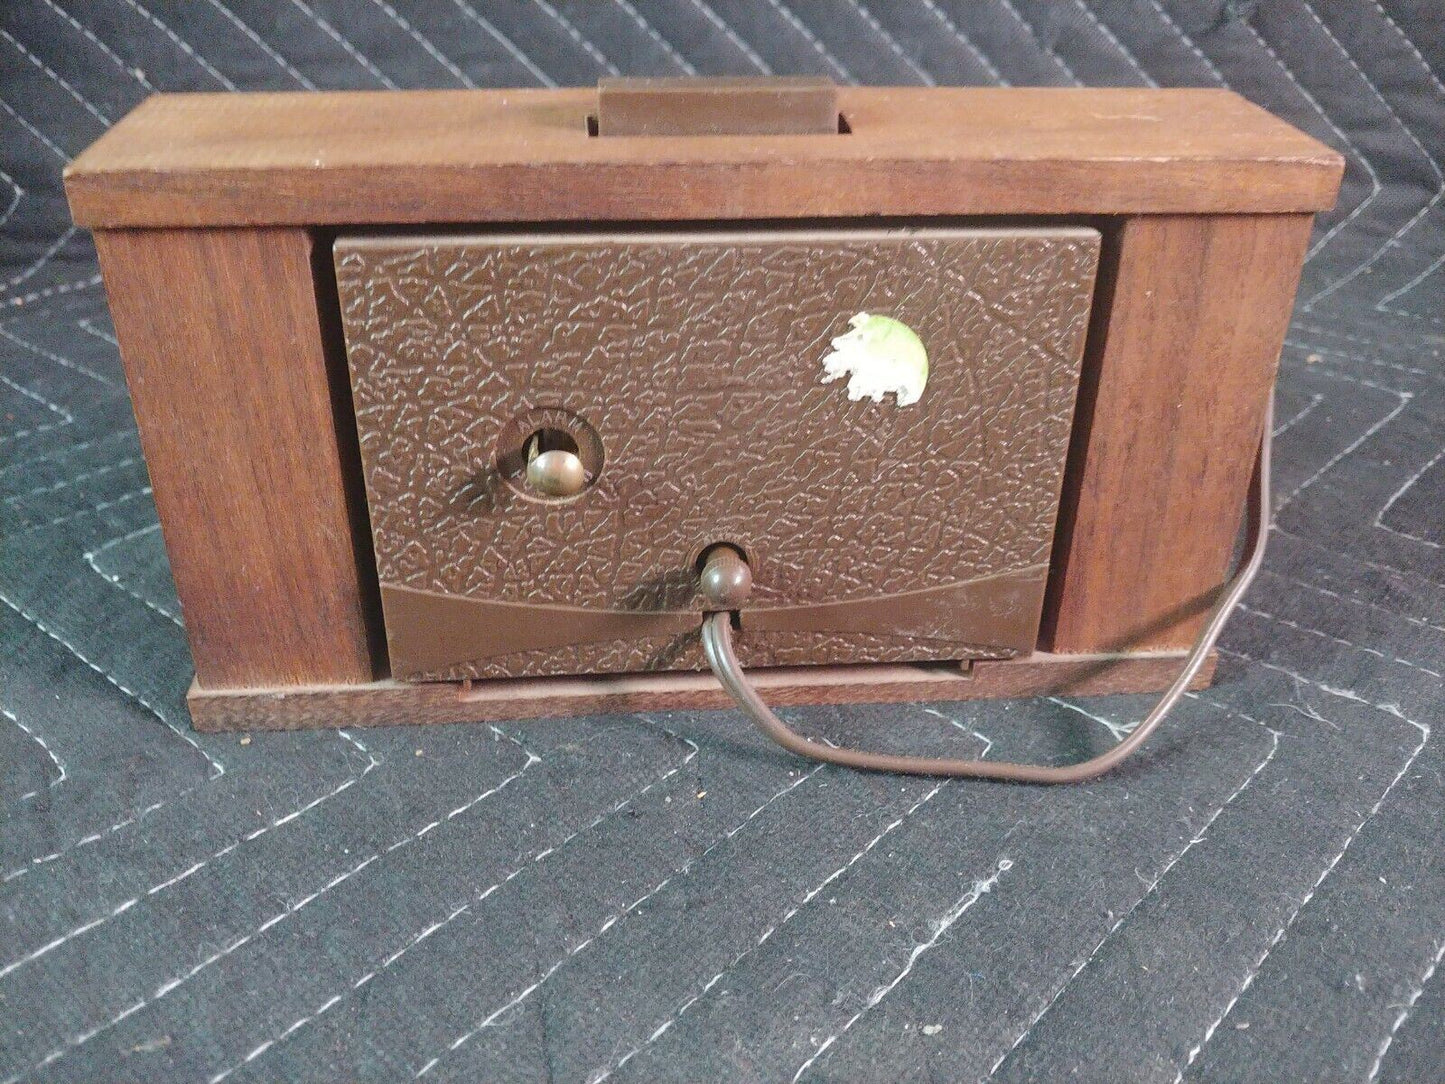 1950s Wooden Case Sears Tradition Ingraham Electric Alarm Clock - 7113 118